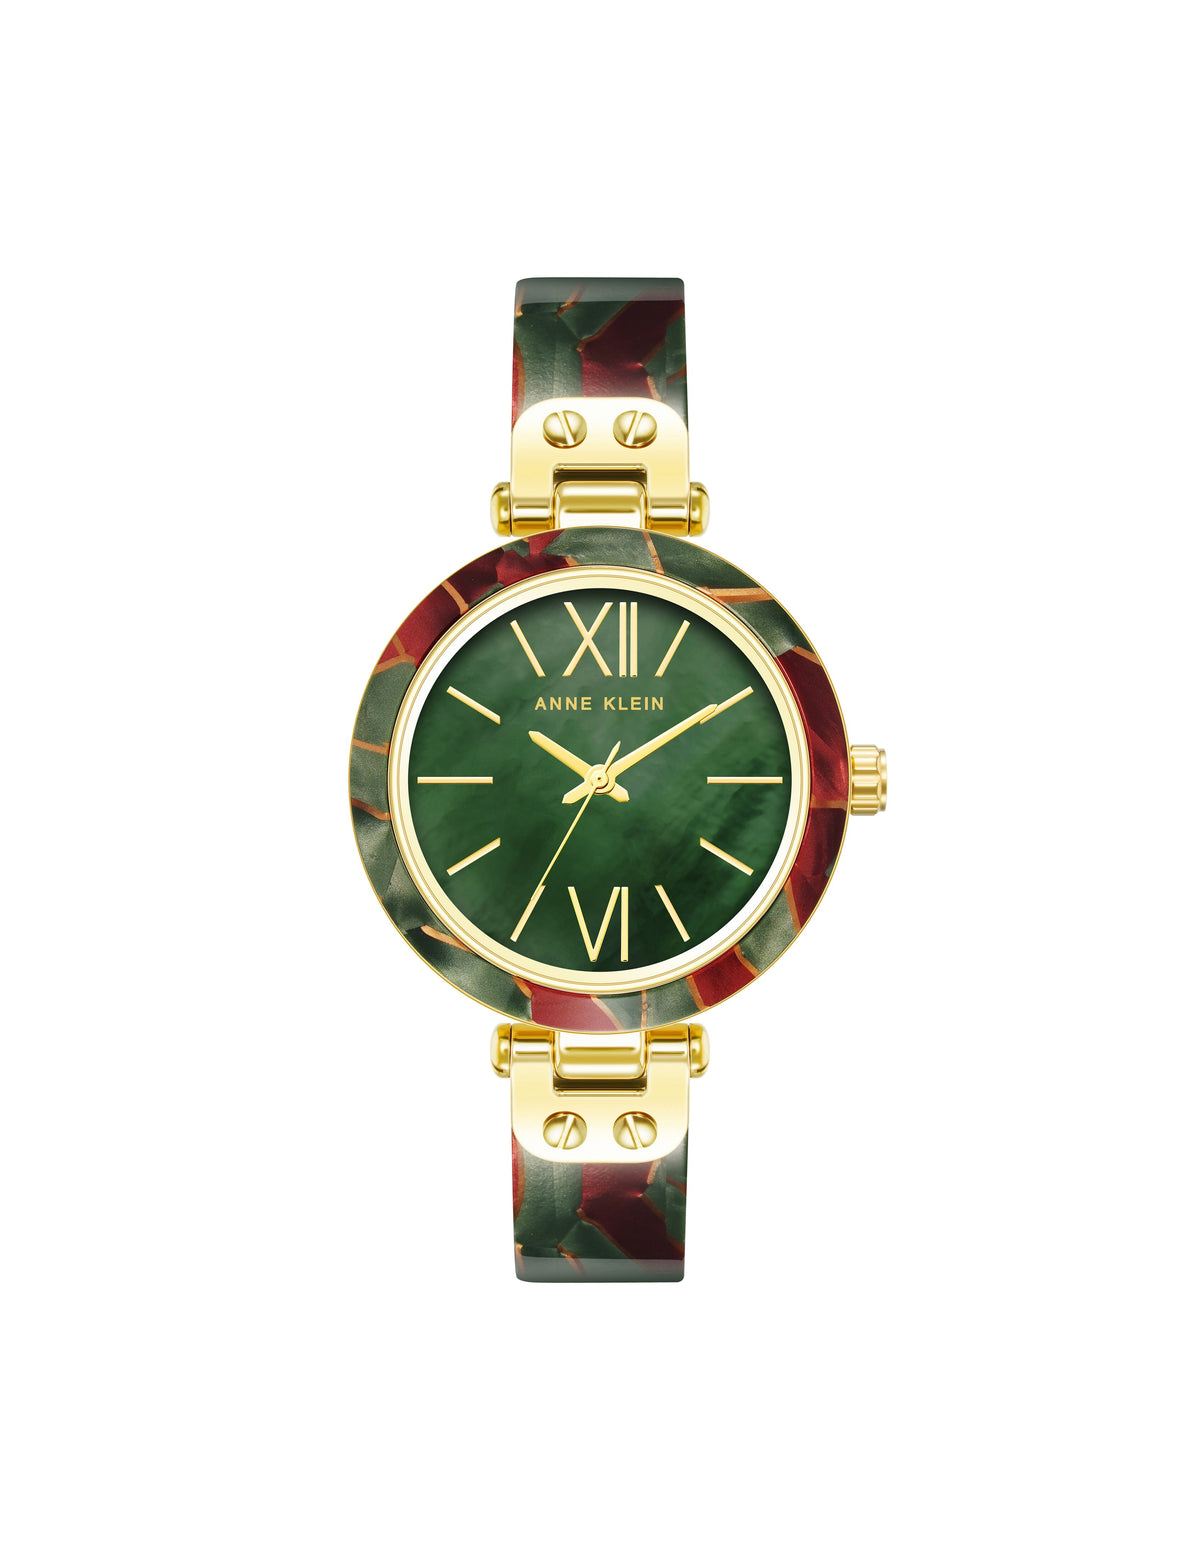 Anne Klein Gold-Tone/ Green/ Burgundy Multi-Color Resin Watch - Clearance